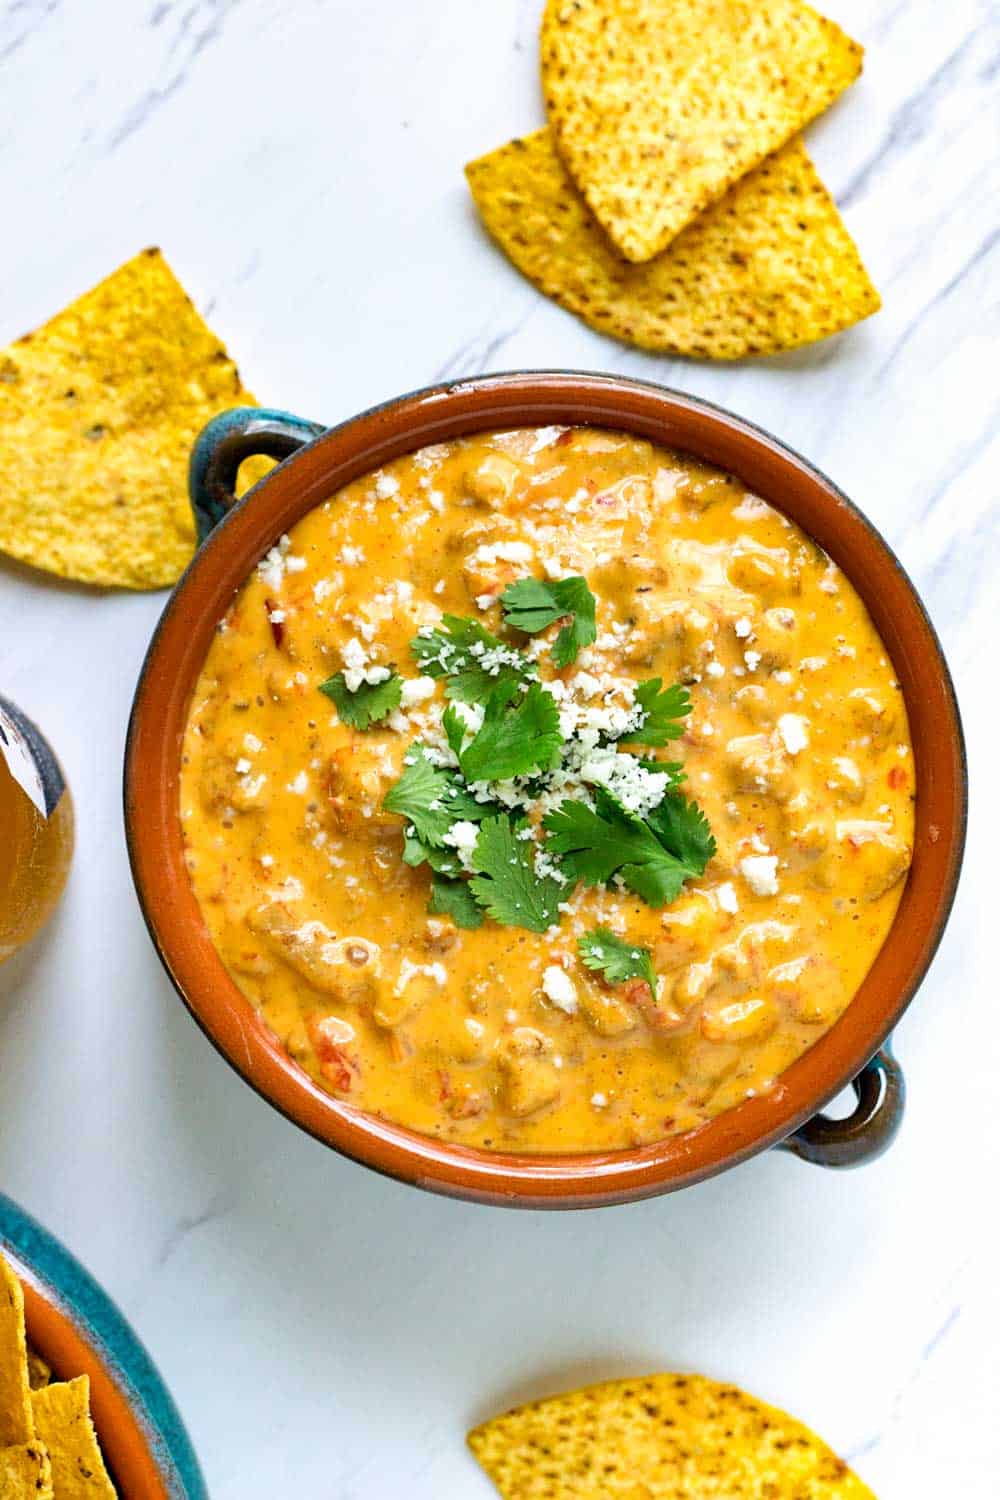 Bowl of spicy Mexican warm cheese appetizer made with beef